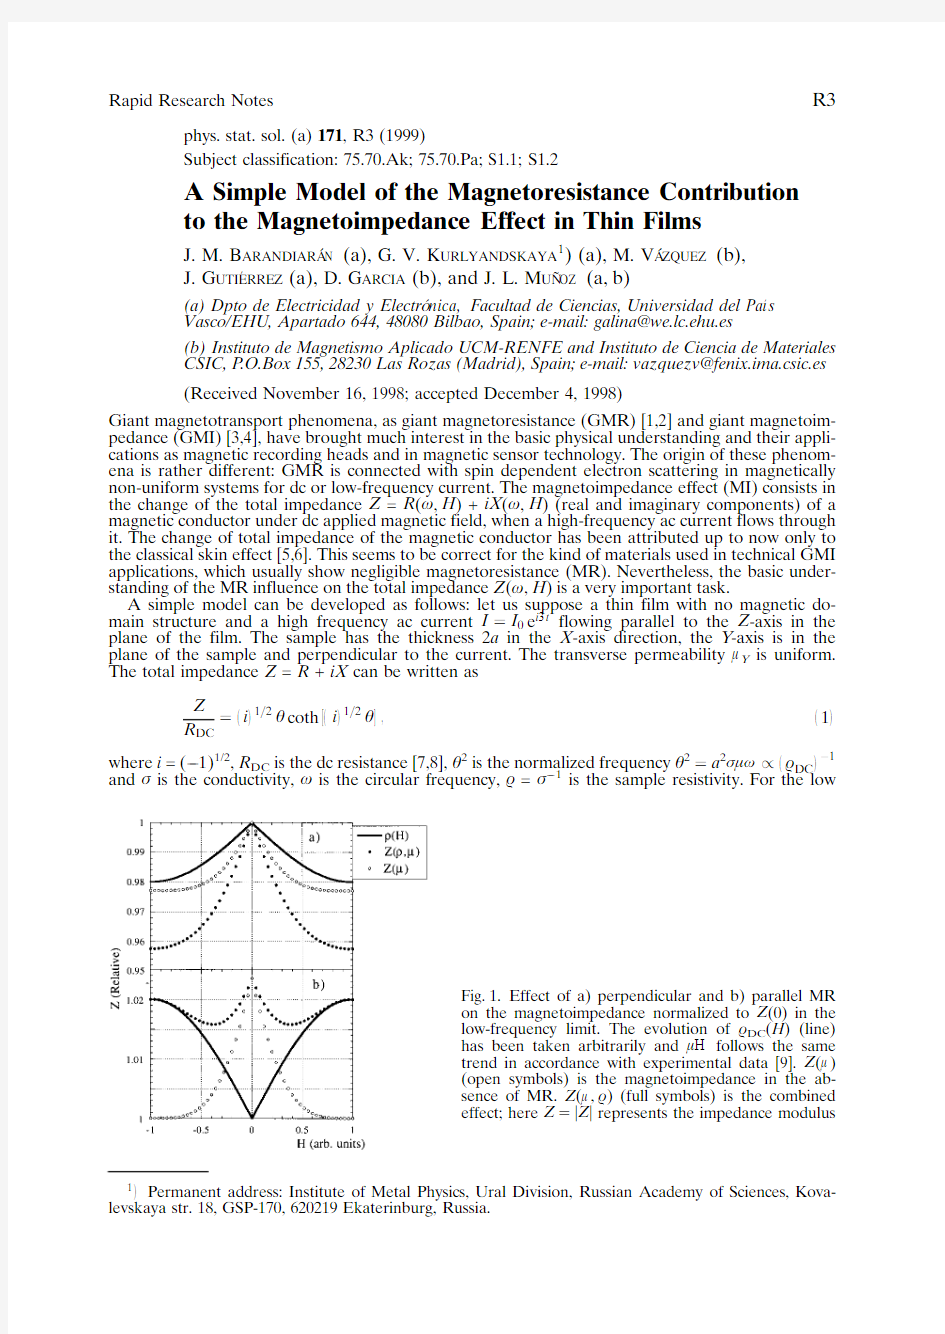 A Simple Model of the Magnetoresistance Contribution to the Magnetoimpedance Effect in Thin